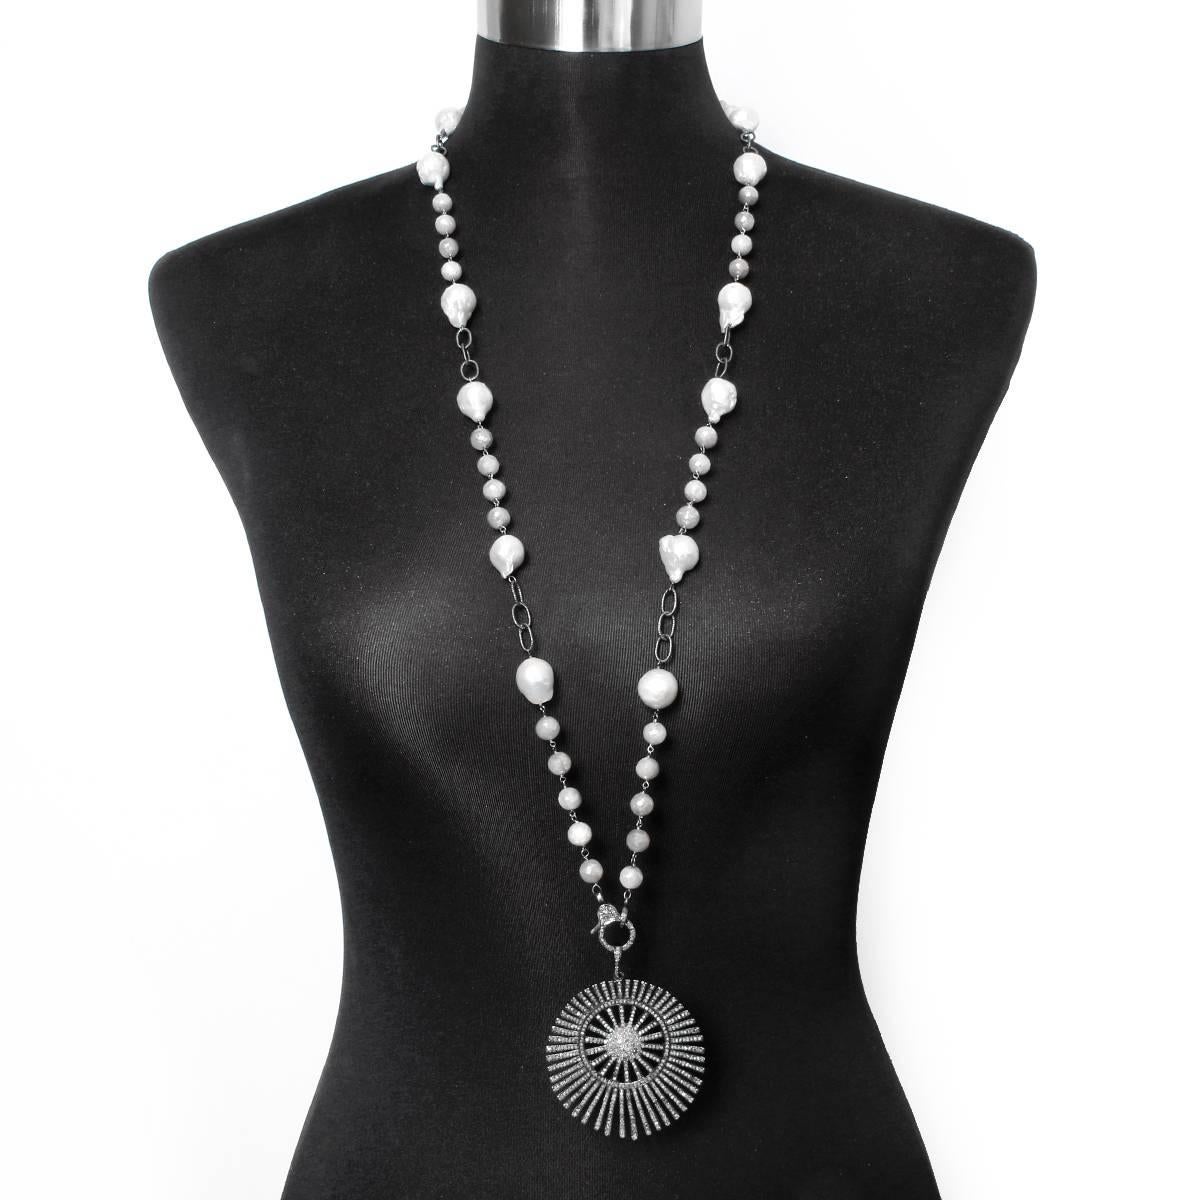 This bohemian necklace features a sunburst pendant and diamond clasp; both set in oxidized silver on a grey moonstone and freshwater pearl chain. Pendant including clasp measures apx. 3-1/4 inches in length on apx. a 34-inch chain. Total weight is